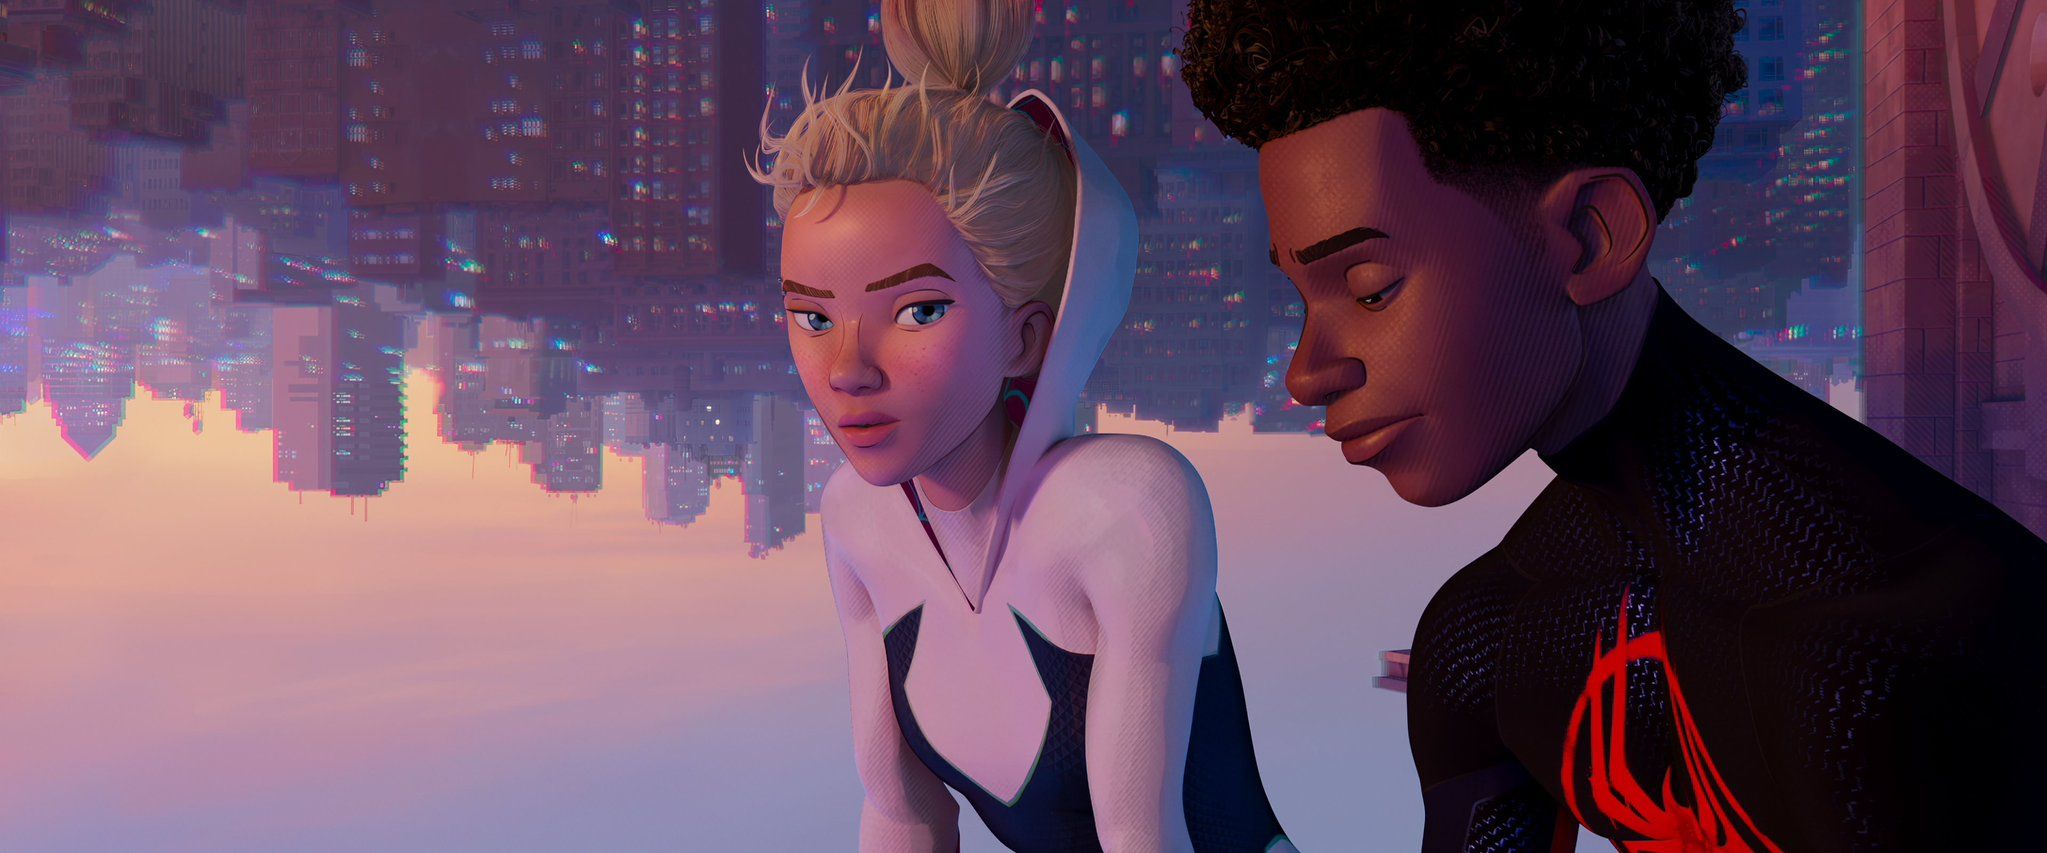 Spider-Man News on X: Here are some across the spider-verse